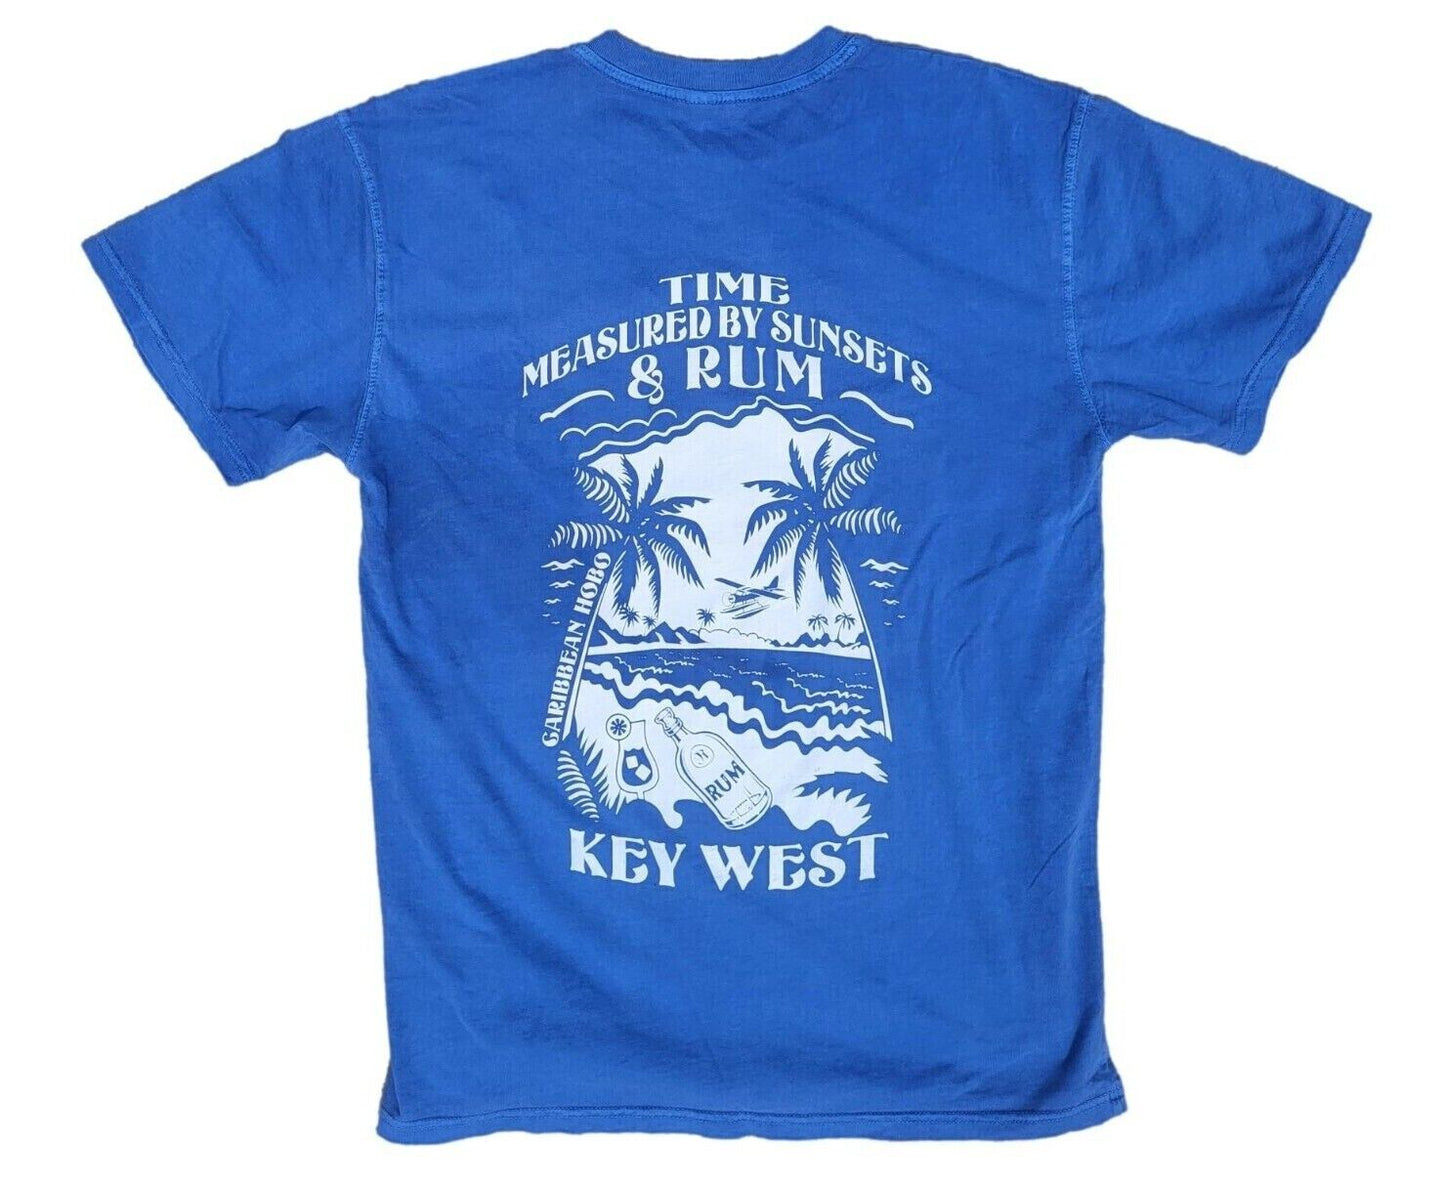 Time measured by sunsets and rum...Key West t-shirt